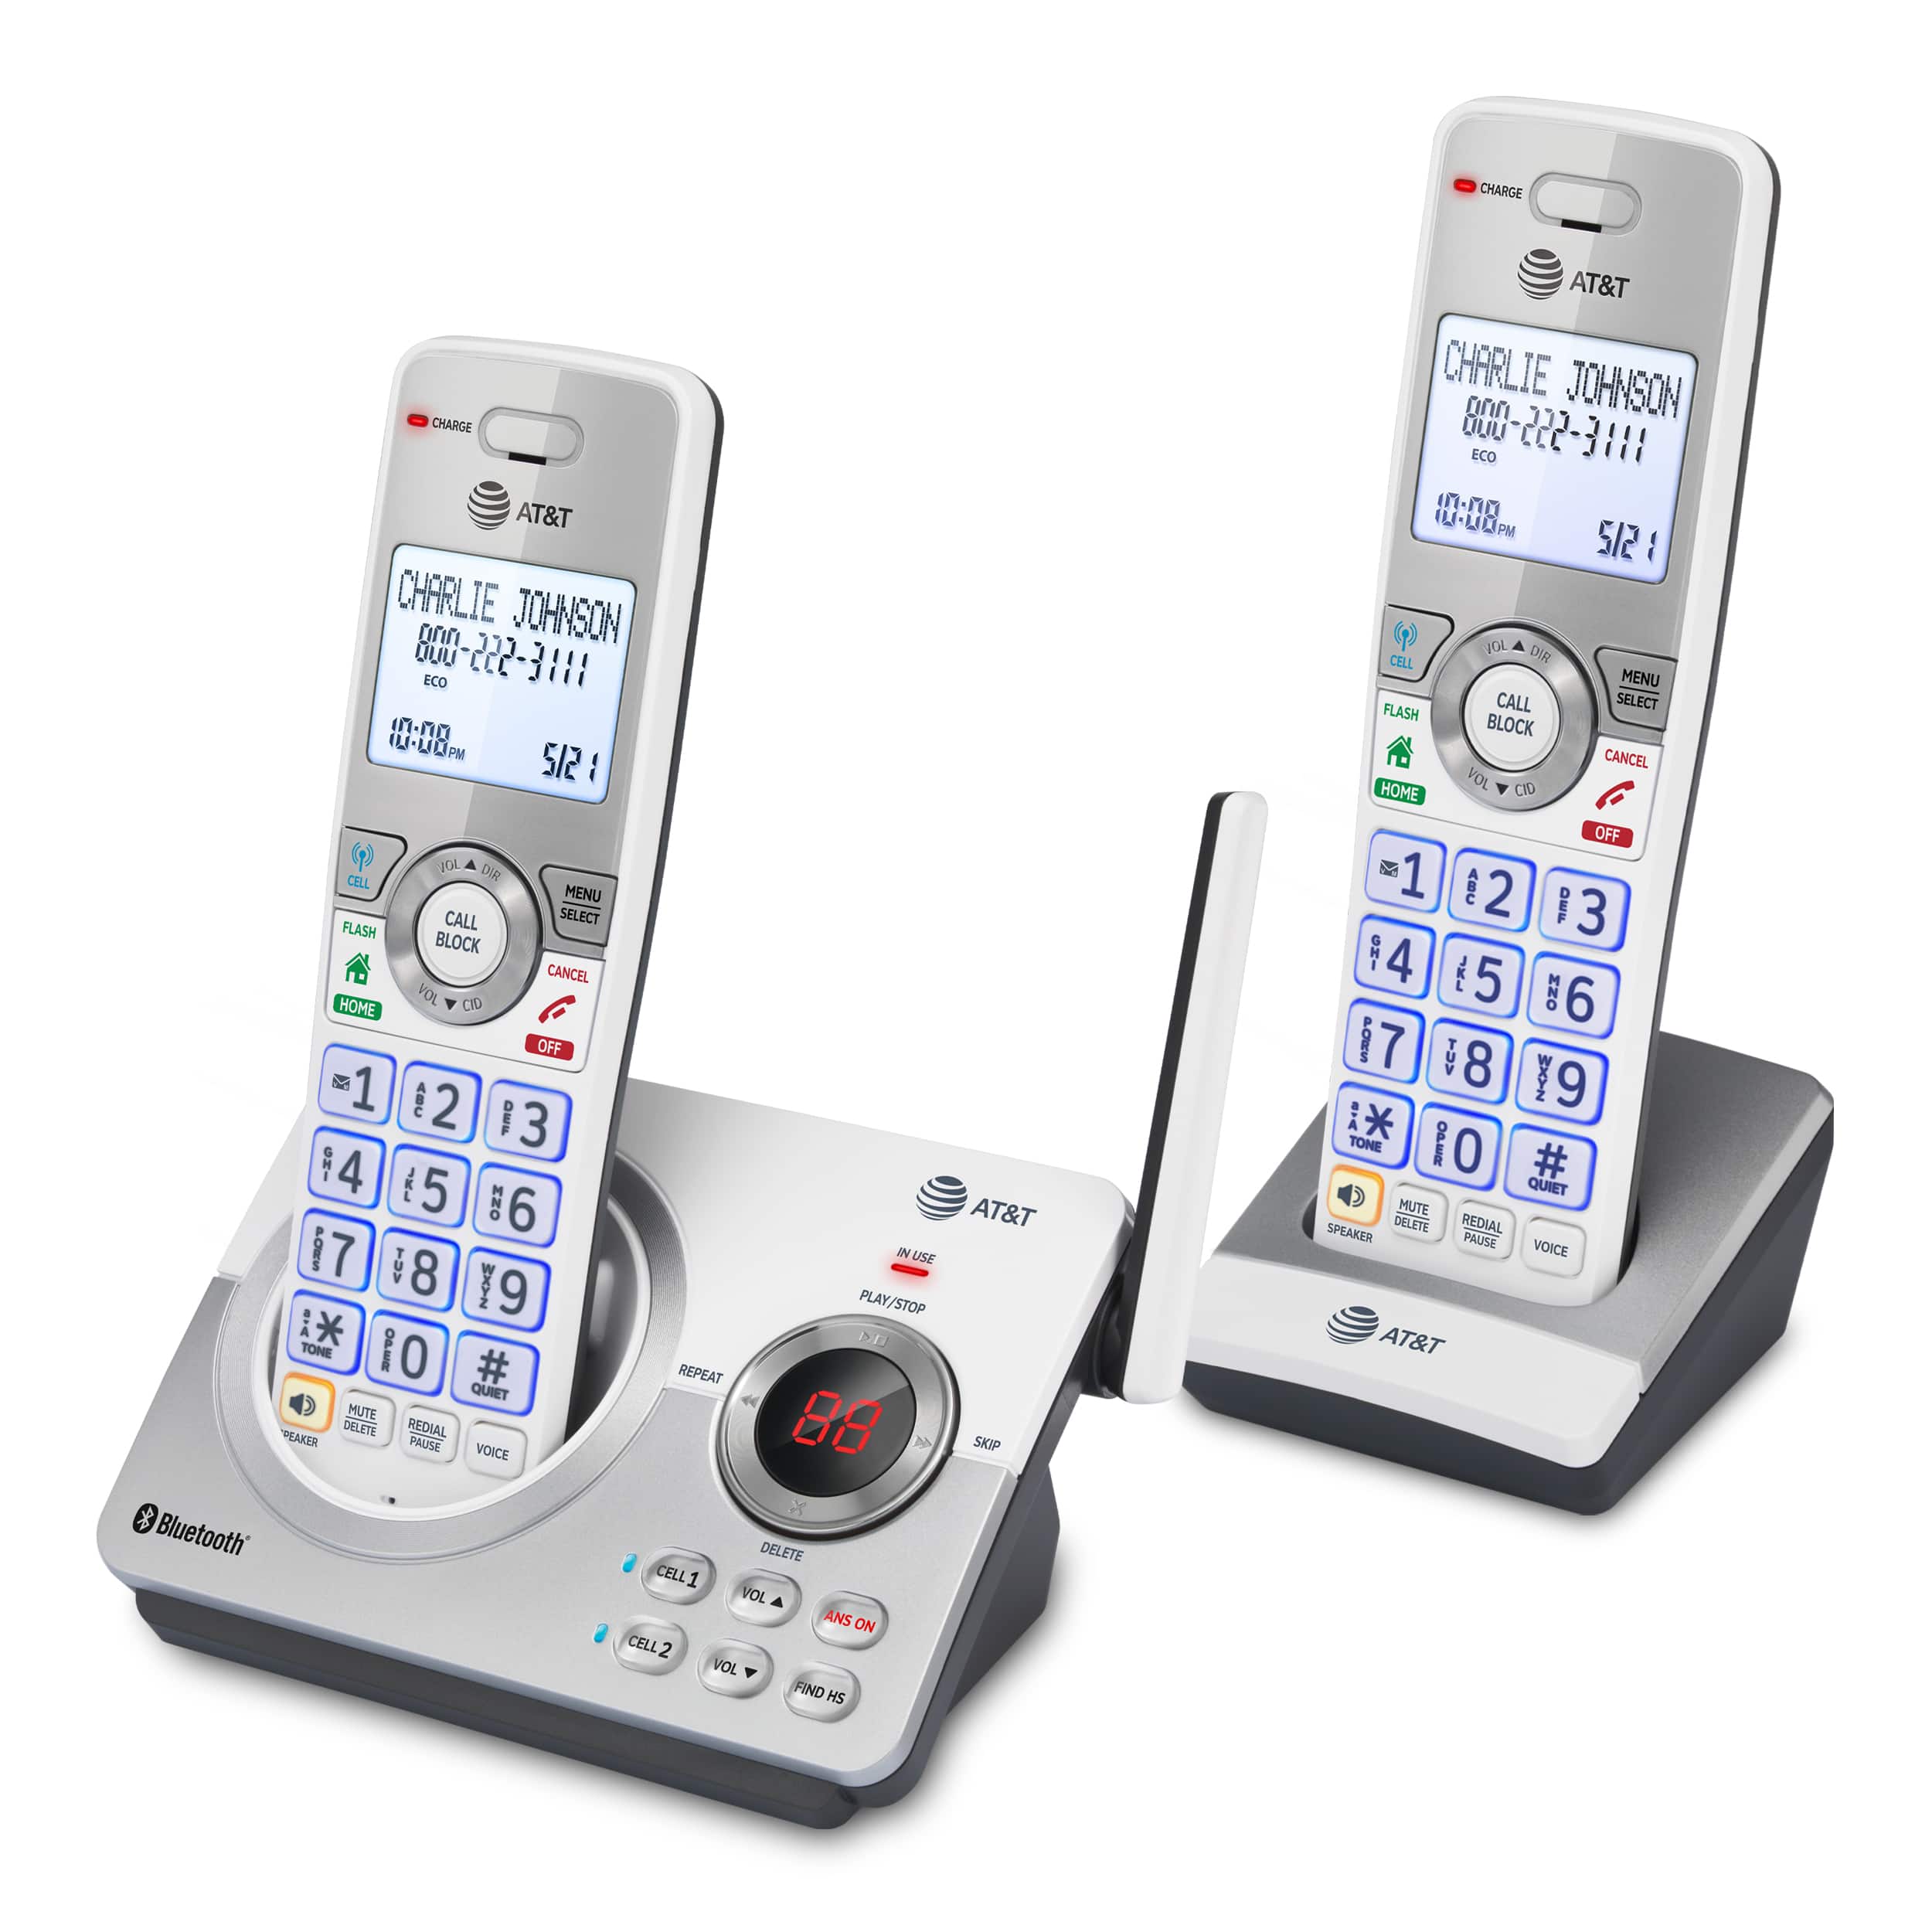 2-Handset Expandable Cordless Phone with Unsurpassed Range, Bluetooth Connect to Cell™, Smart Call Blocker and Answering System - view 2